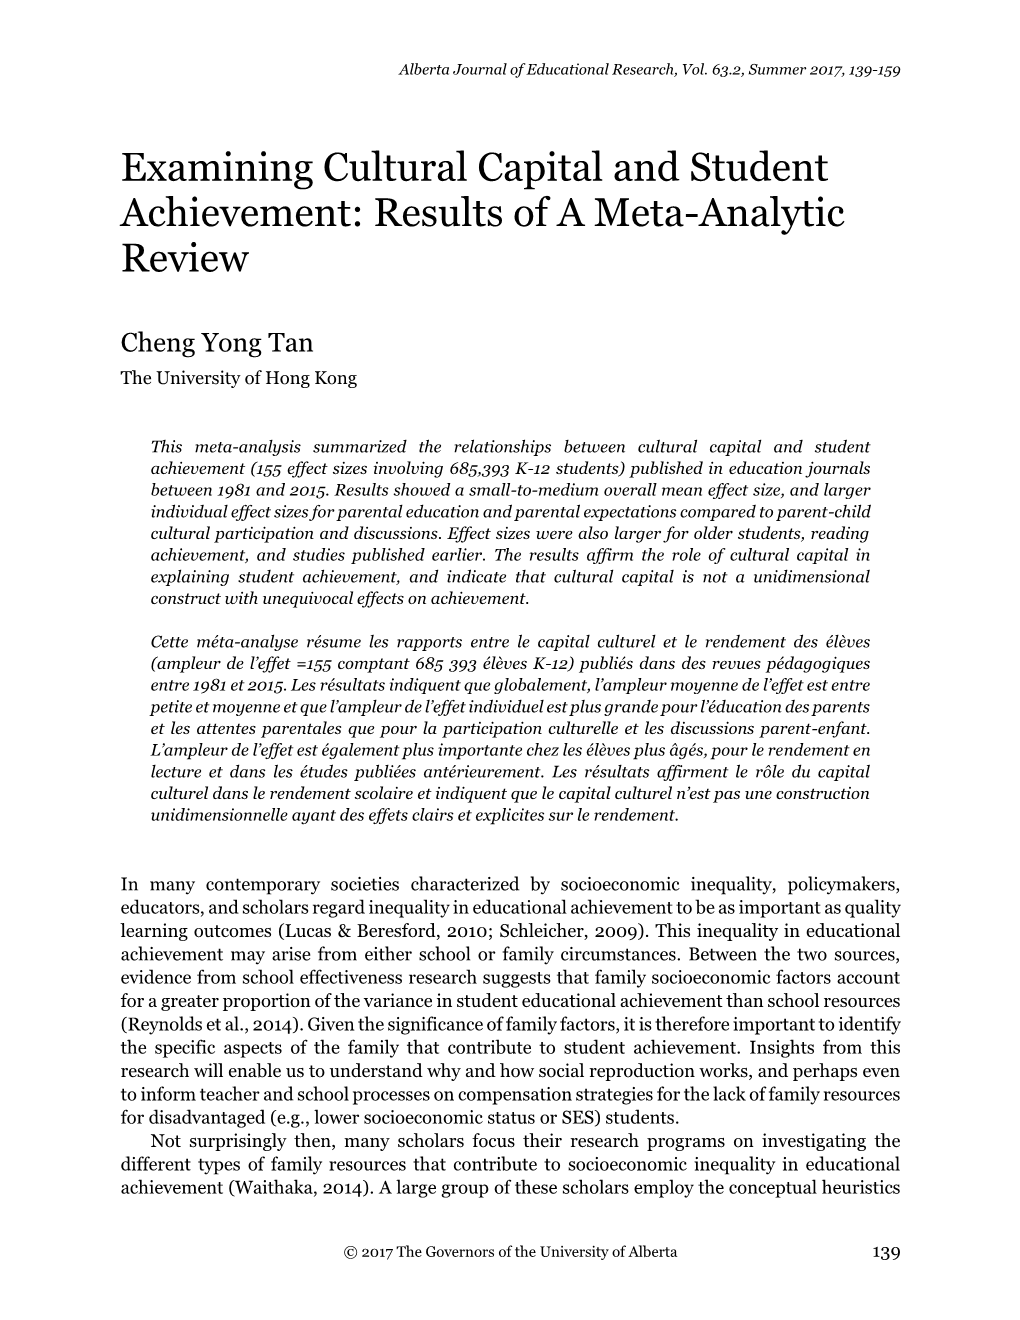 Examining Cultural Capital and Student Achievement: Results of a Meta-Analytic Review